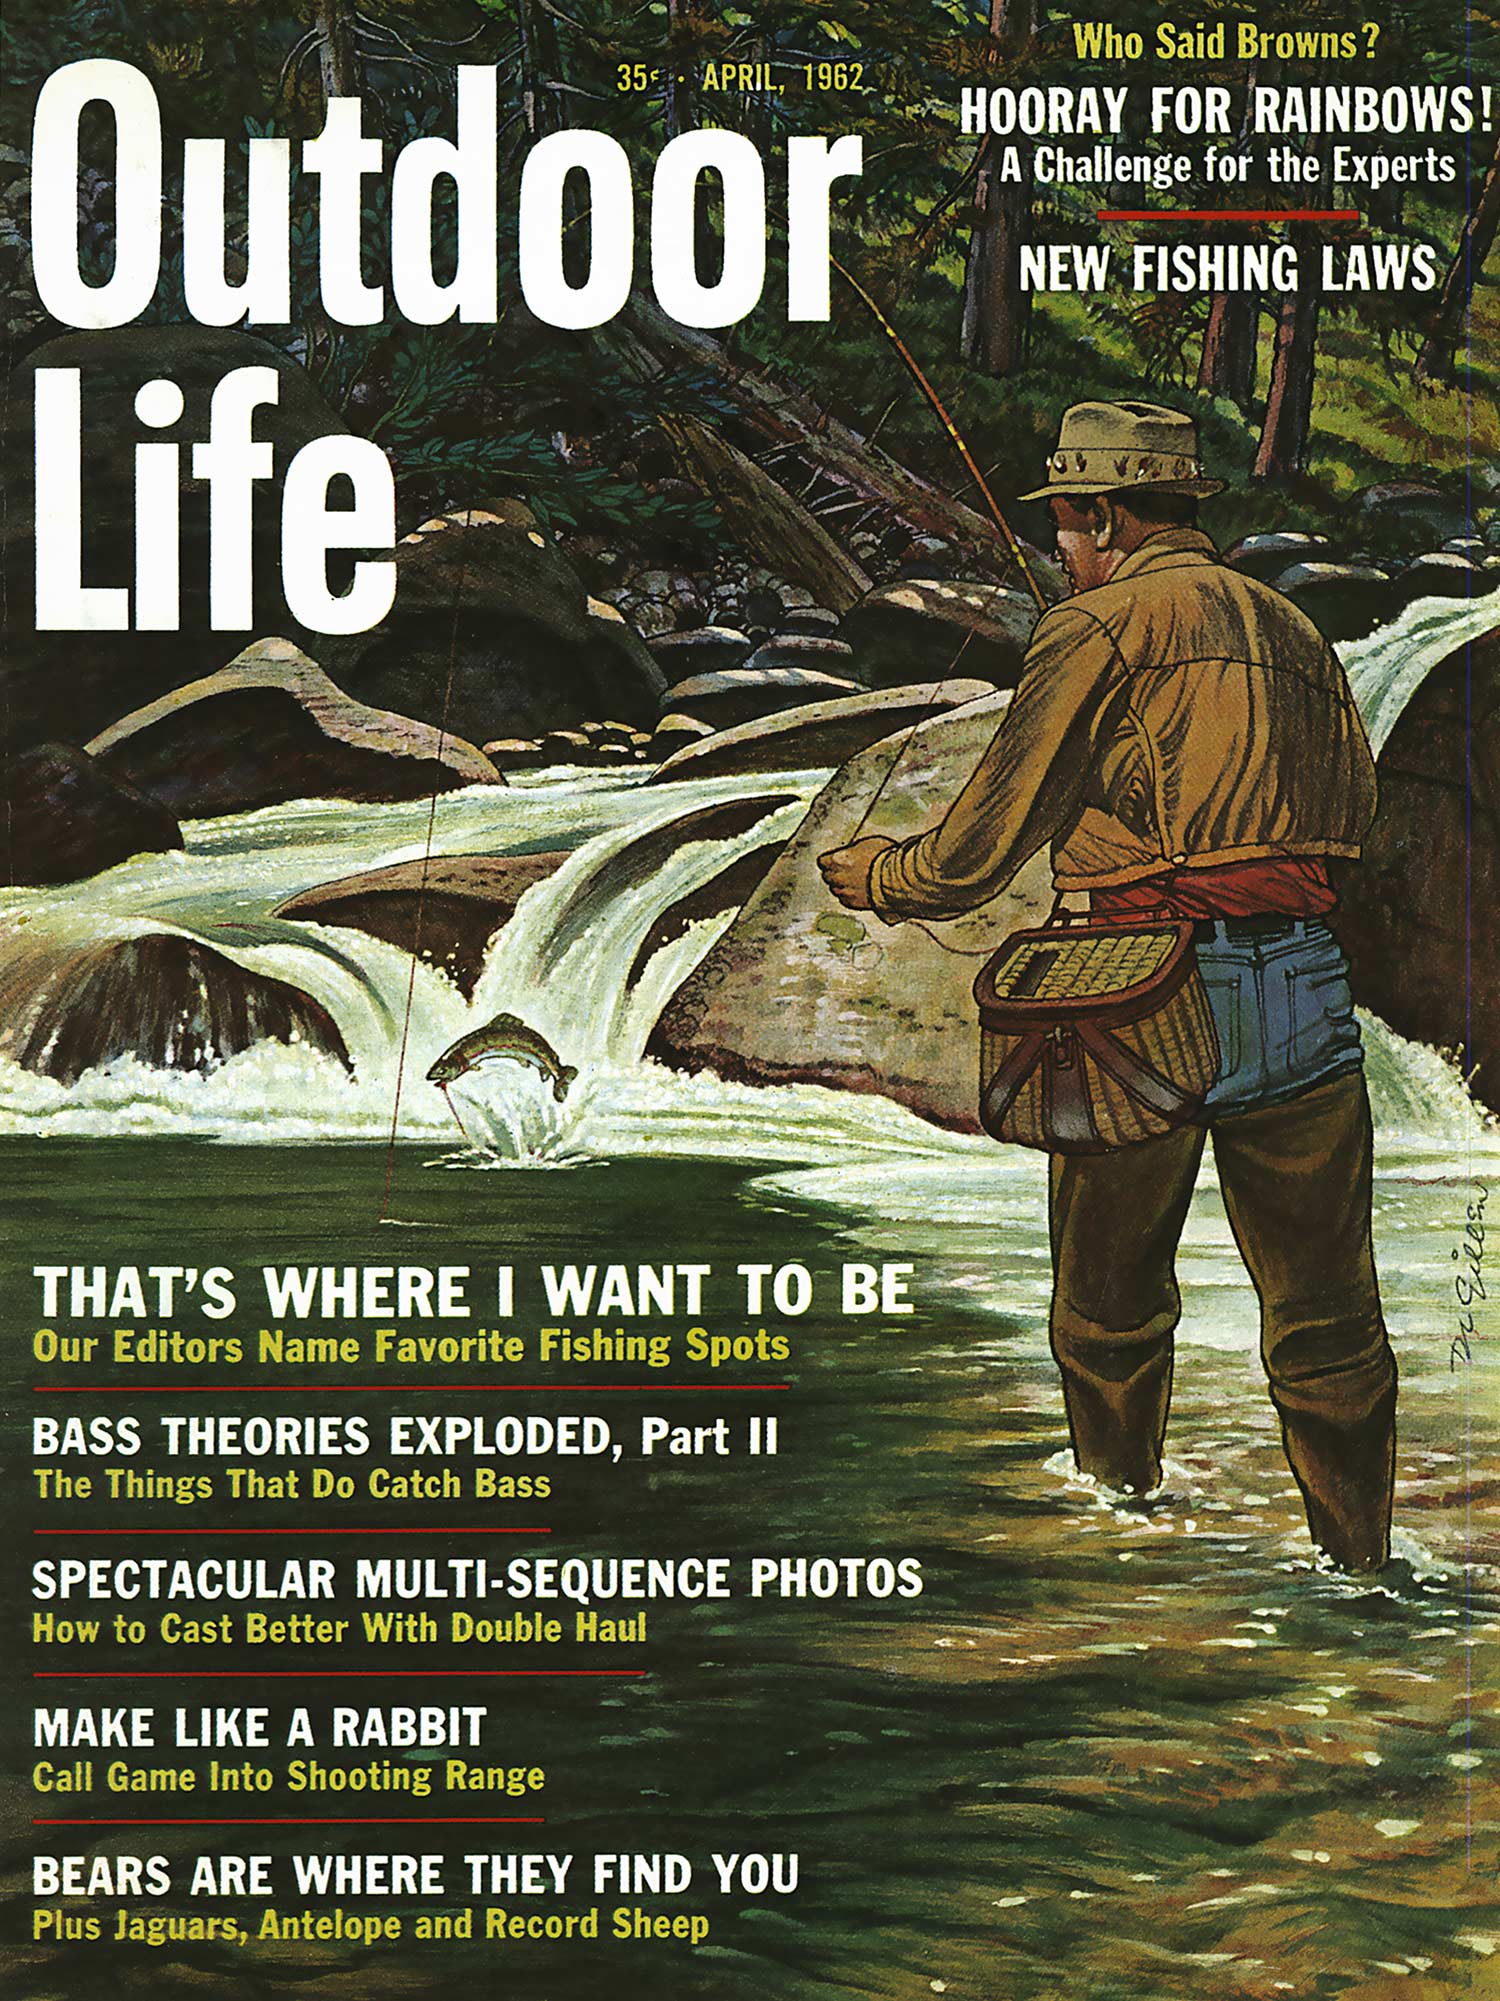 April 1962 Outdoor Life magazine cover; trout fisherman in river has a rainbow trout on the line.